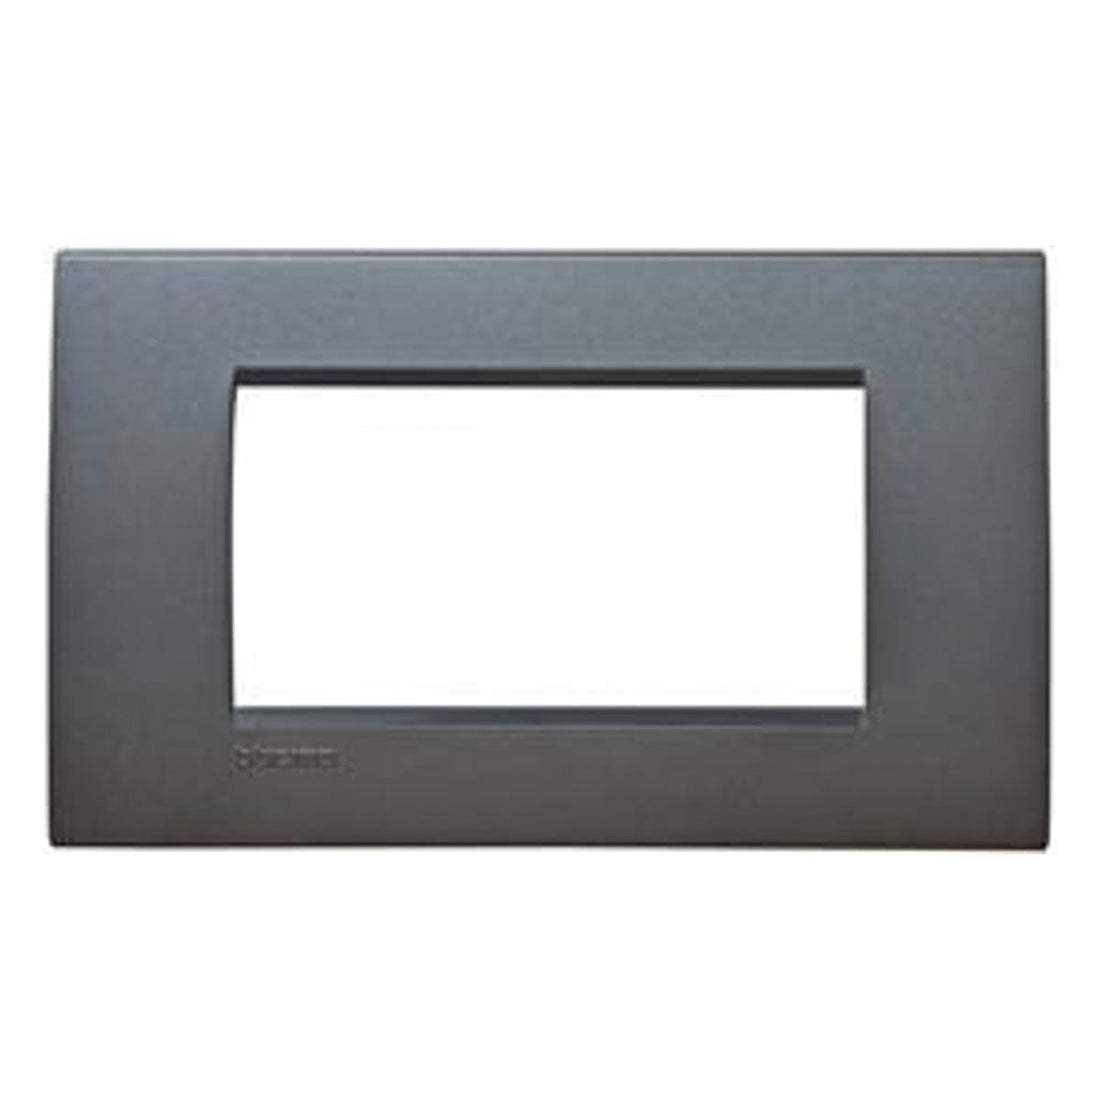 LIVING LIGHT PLATE 4 PLACES ANTHRACITE - best price from Maltashopper.com BR420101310